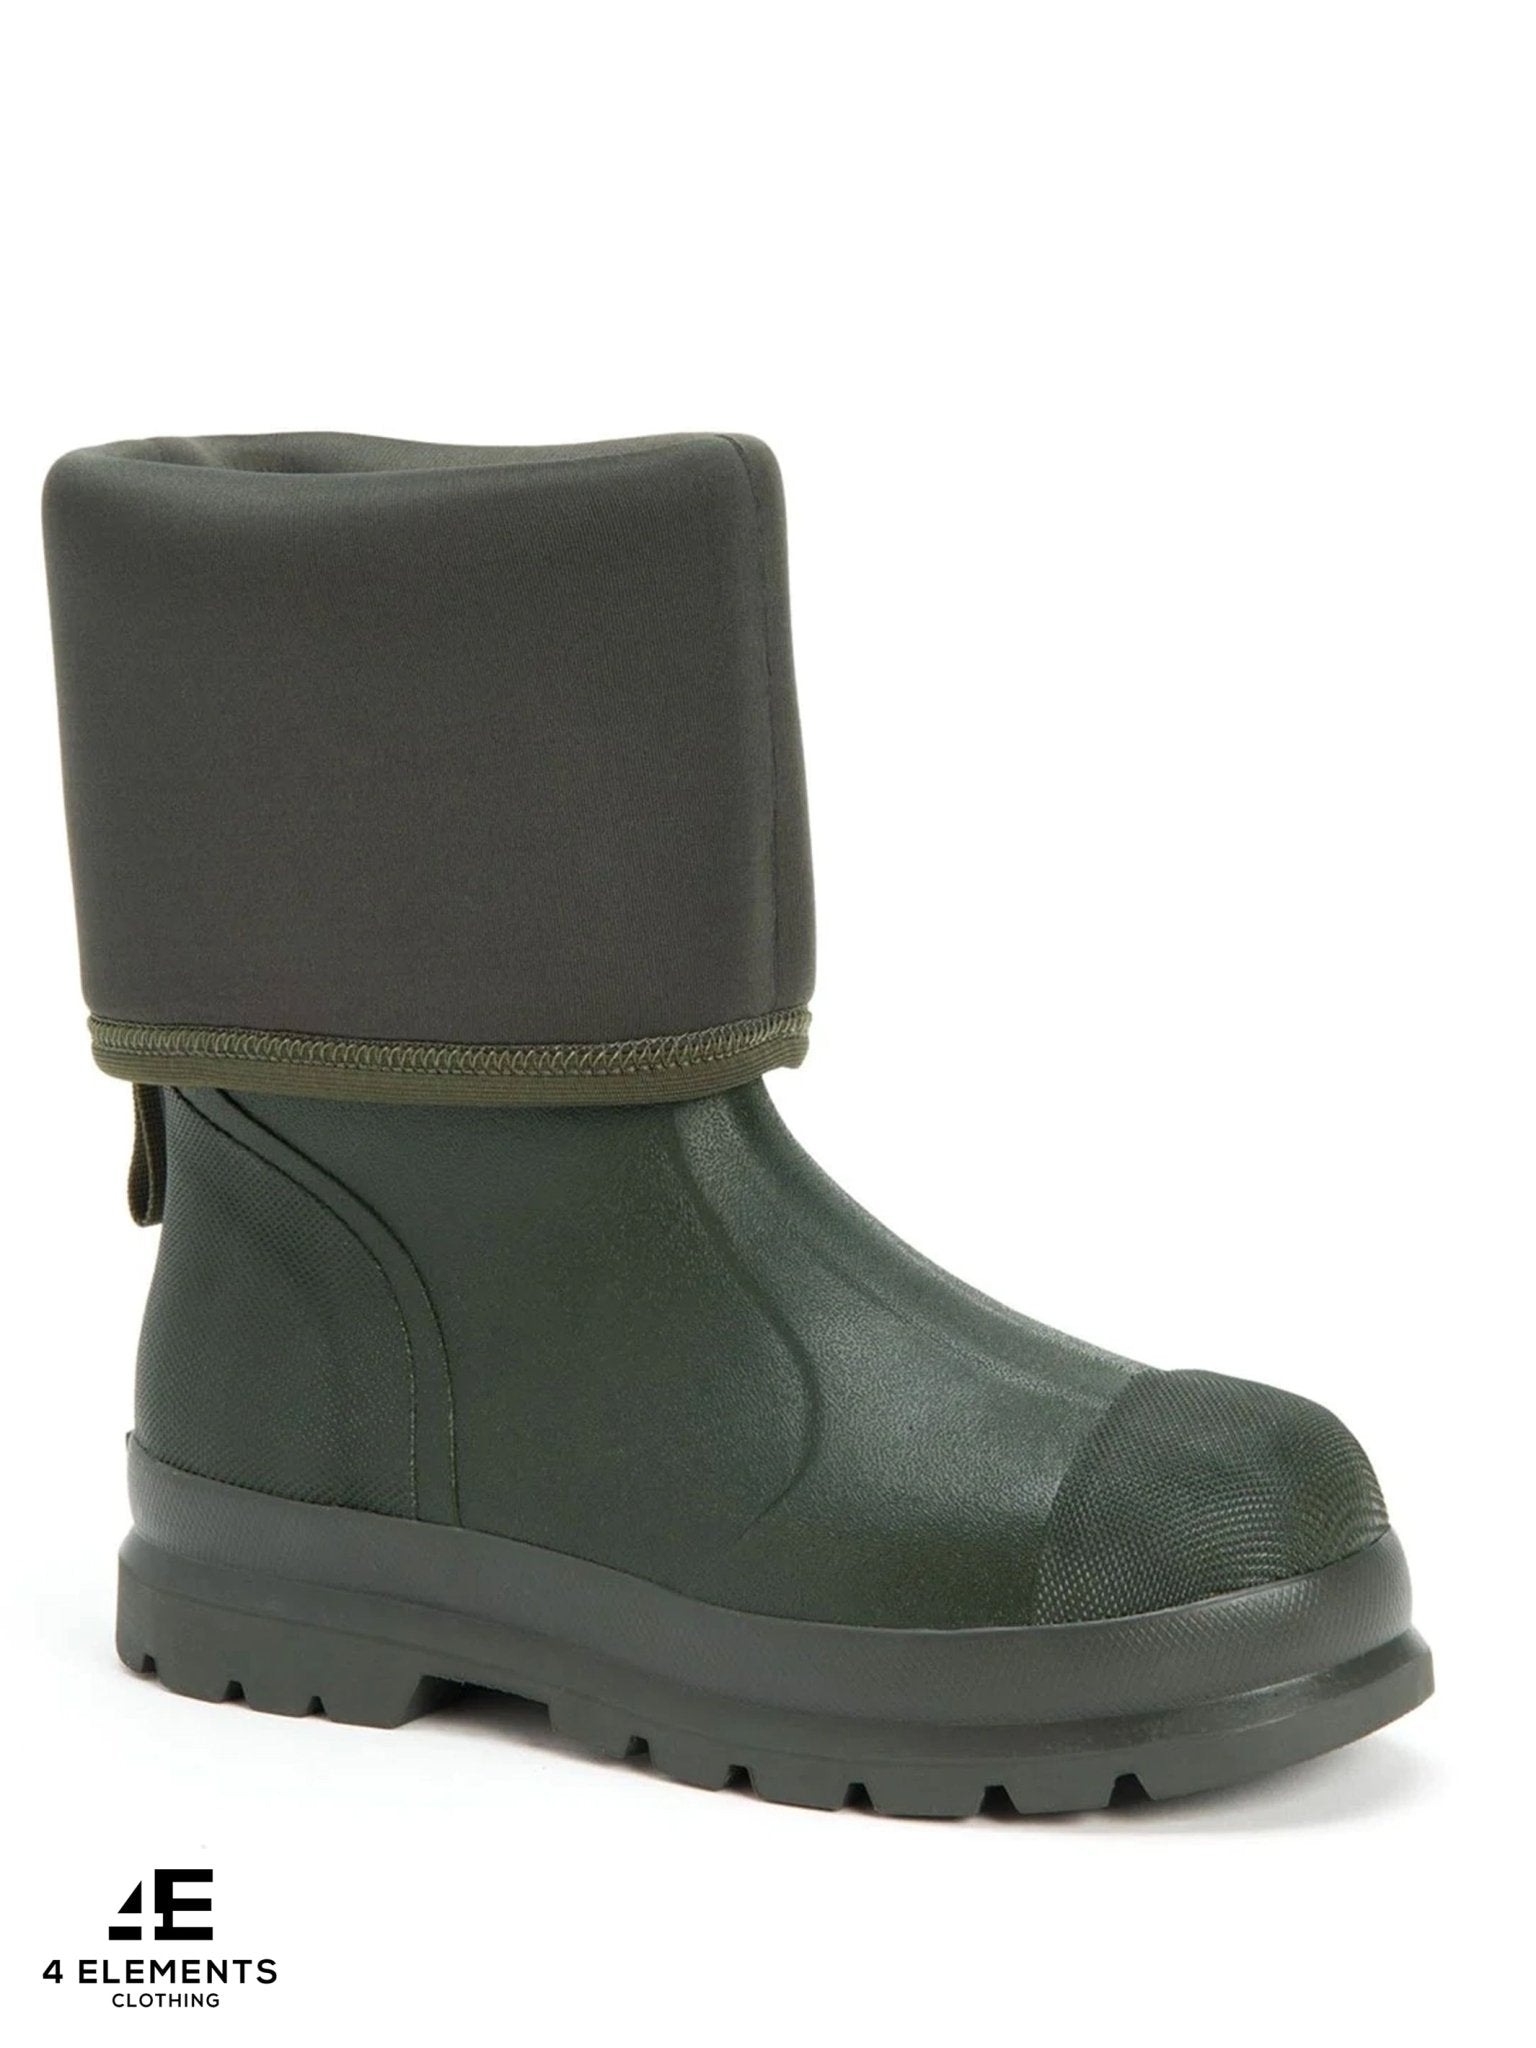 4elementsclothingMuck BootsMuck Boots - Chore Classic Waterproof mens and ladies tall boots.Boots664911300132